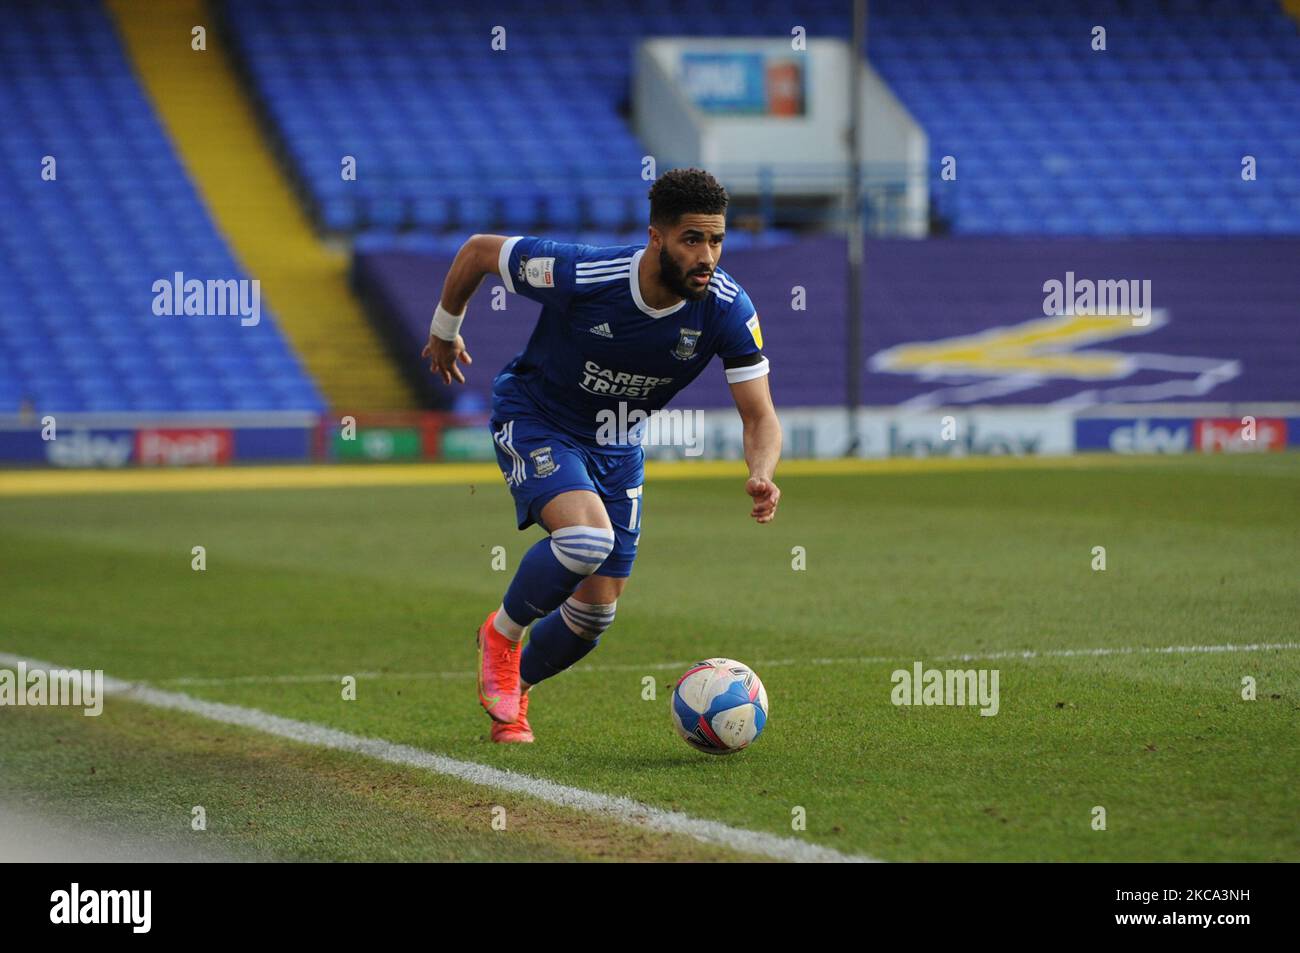 Ipswichs Keanan Bennetts during the Sky Bet League 1 match between Ipswich Town and Doncaster Rovers at Portman Road, Ipswich on Saturday 27th February 2021. (Photo by Ben Pooley/MI News/NurPhoto) Stock Photo